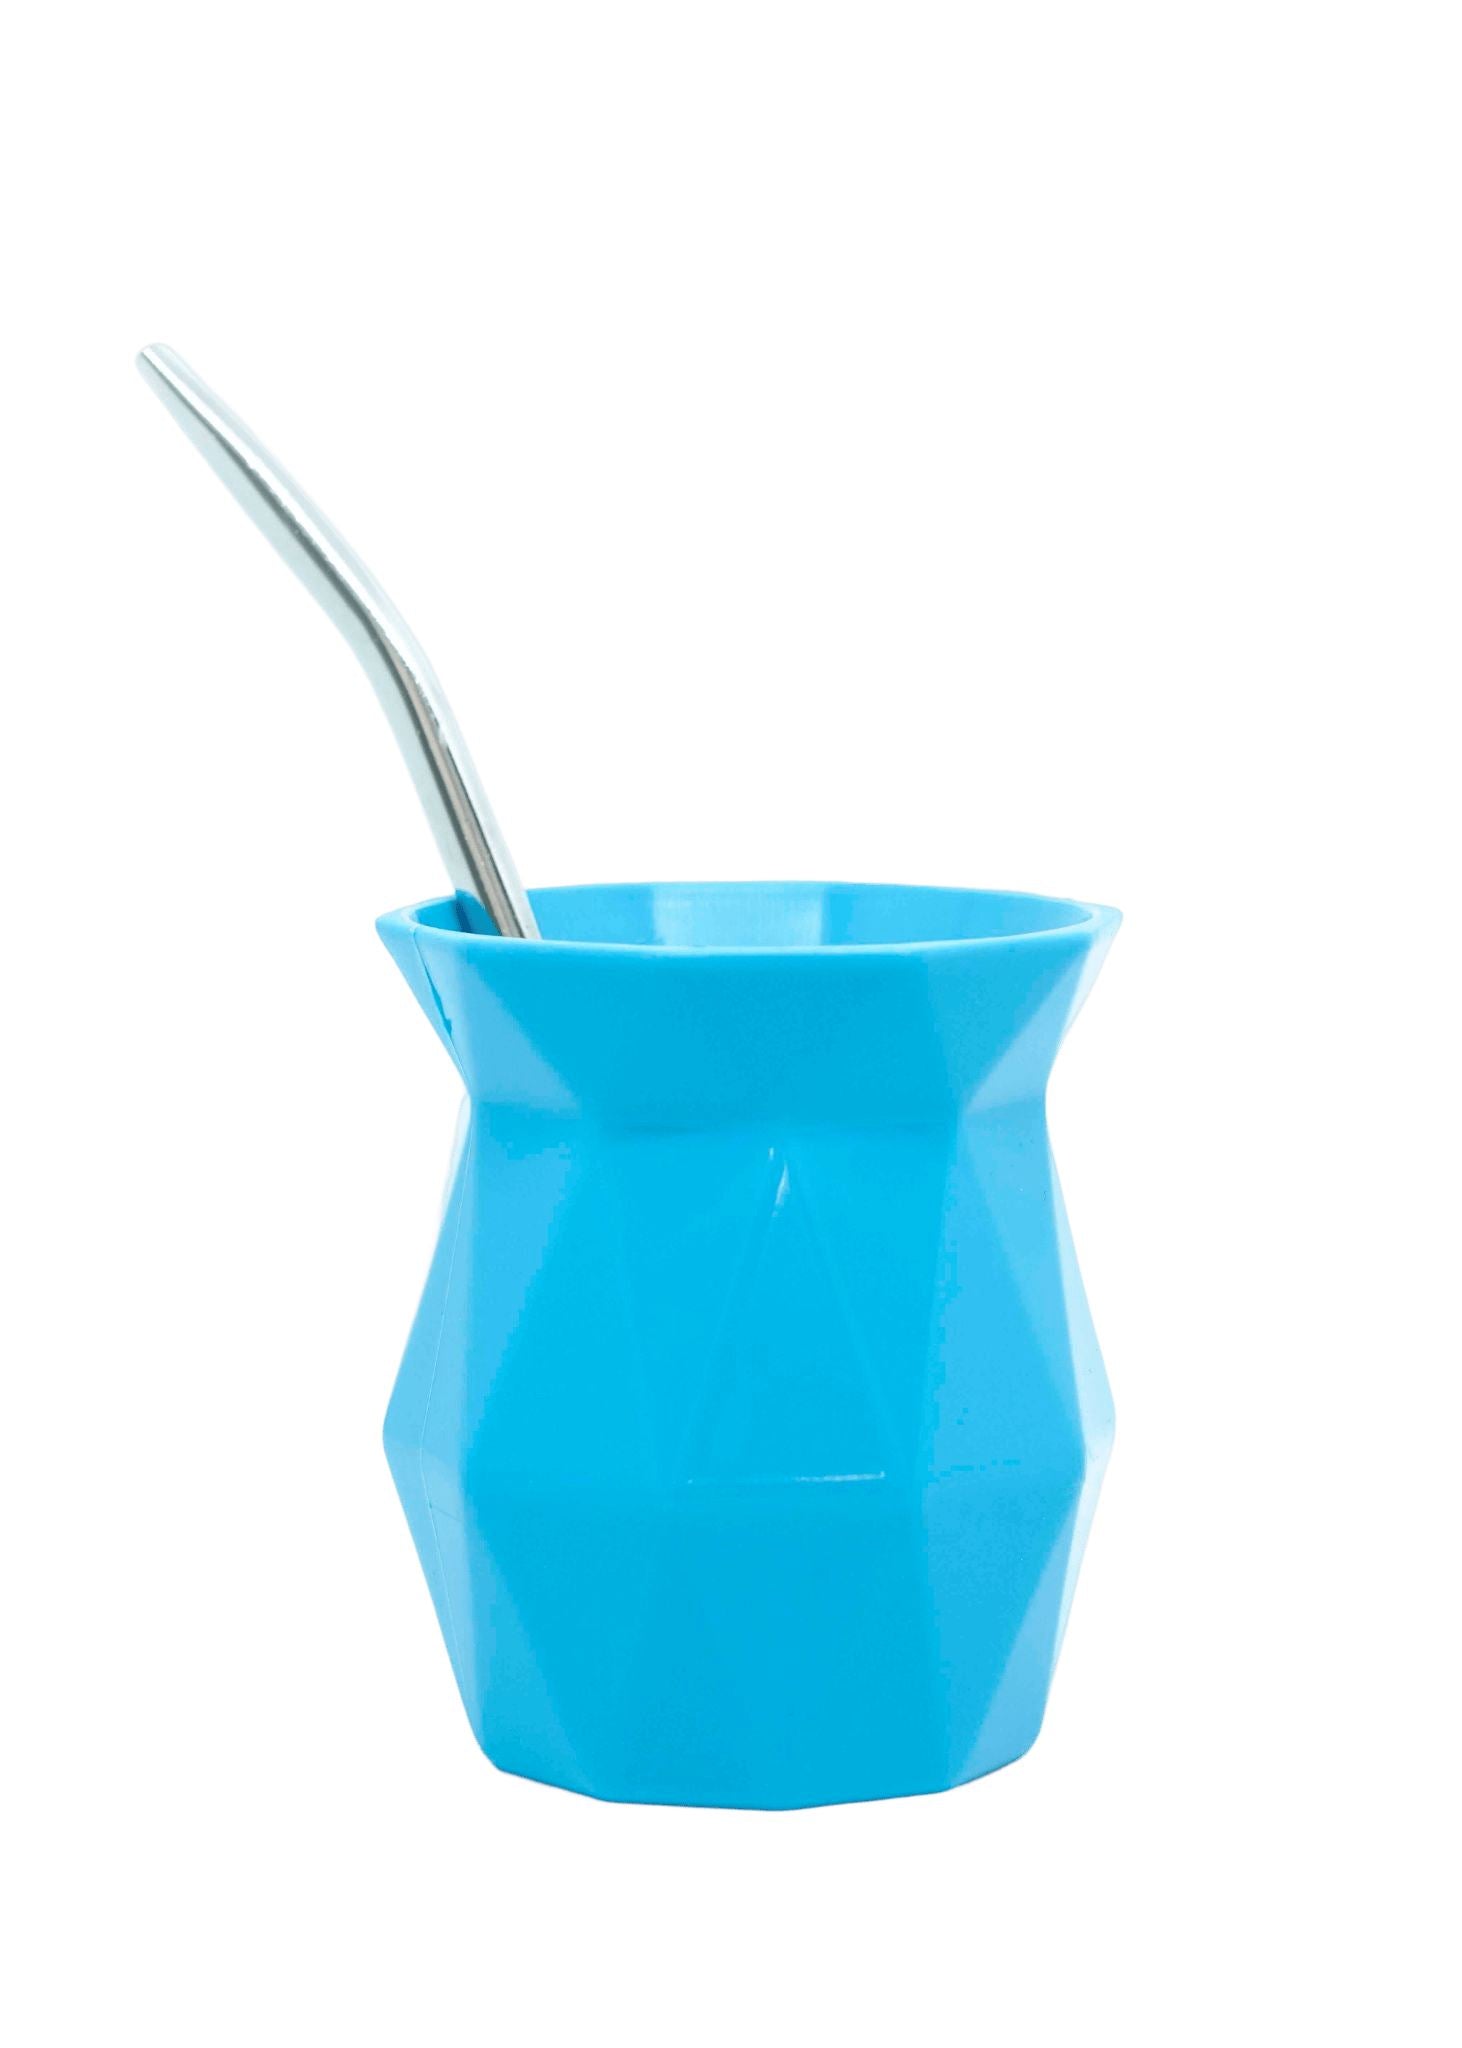 Mito Mate Gourd with Self-extracting Straw - Turquoise (Mate and Bombilla) Mates Hispanic Pantry 